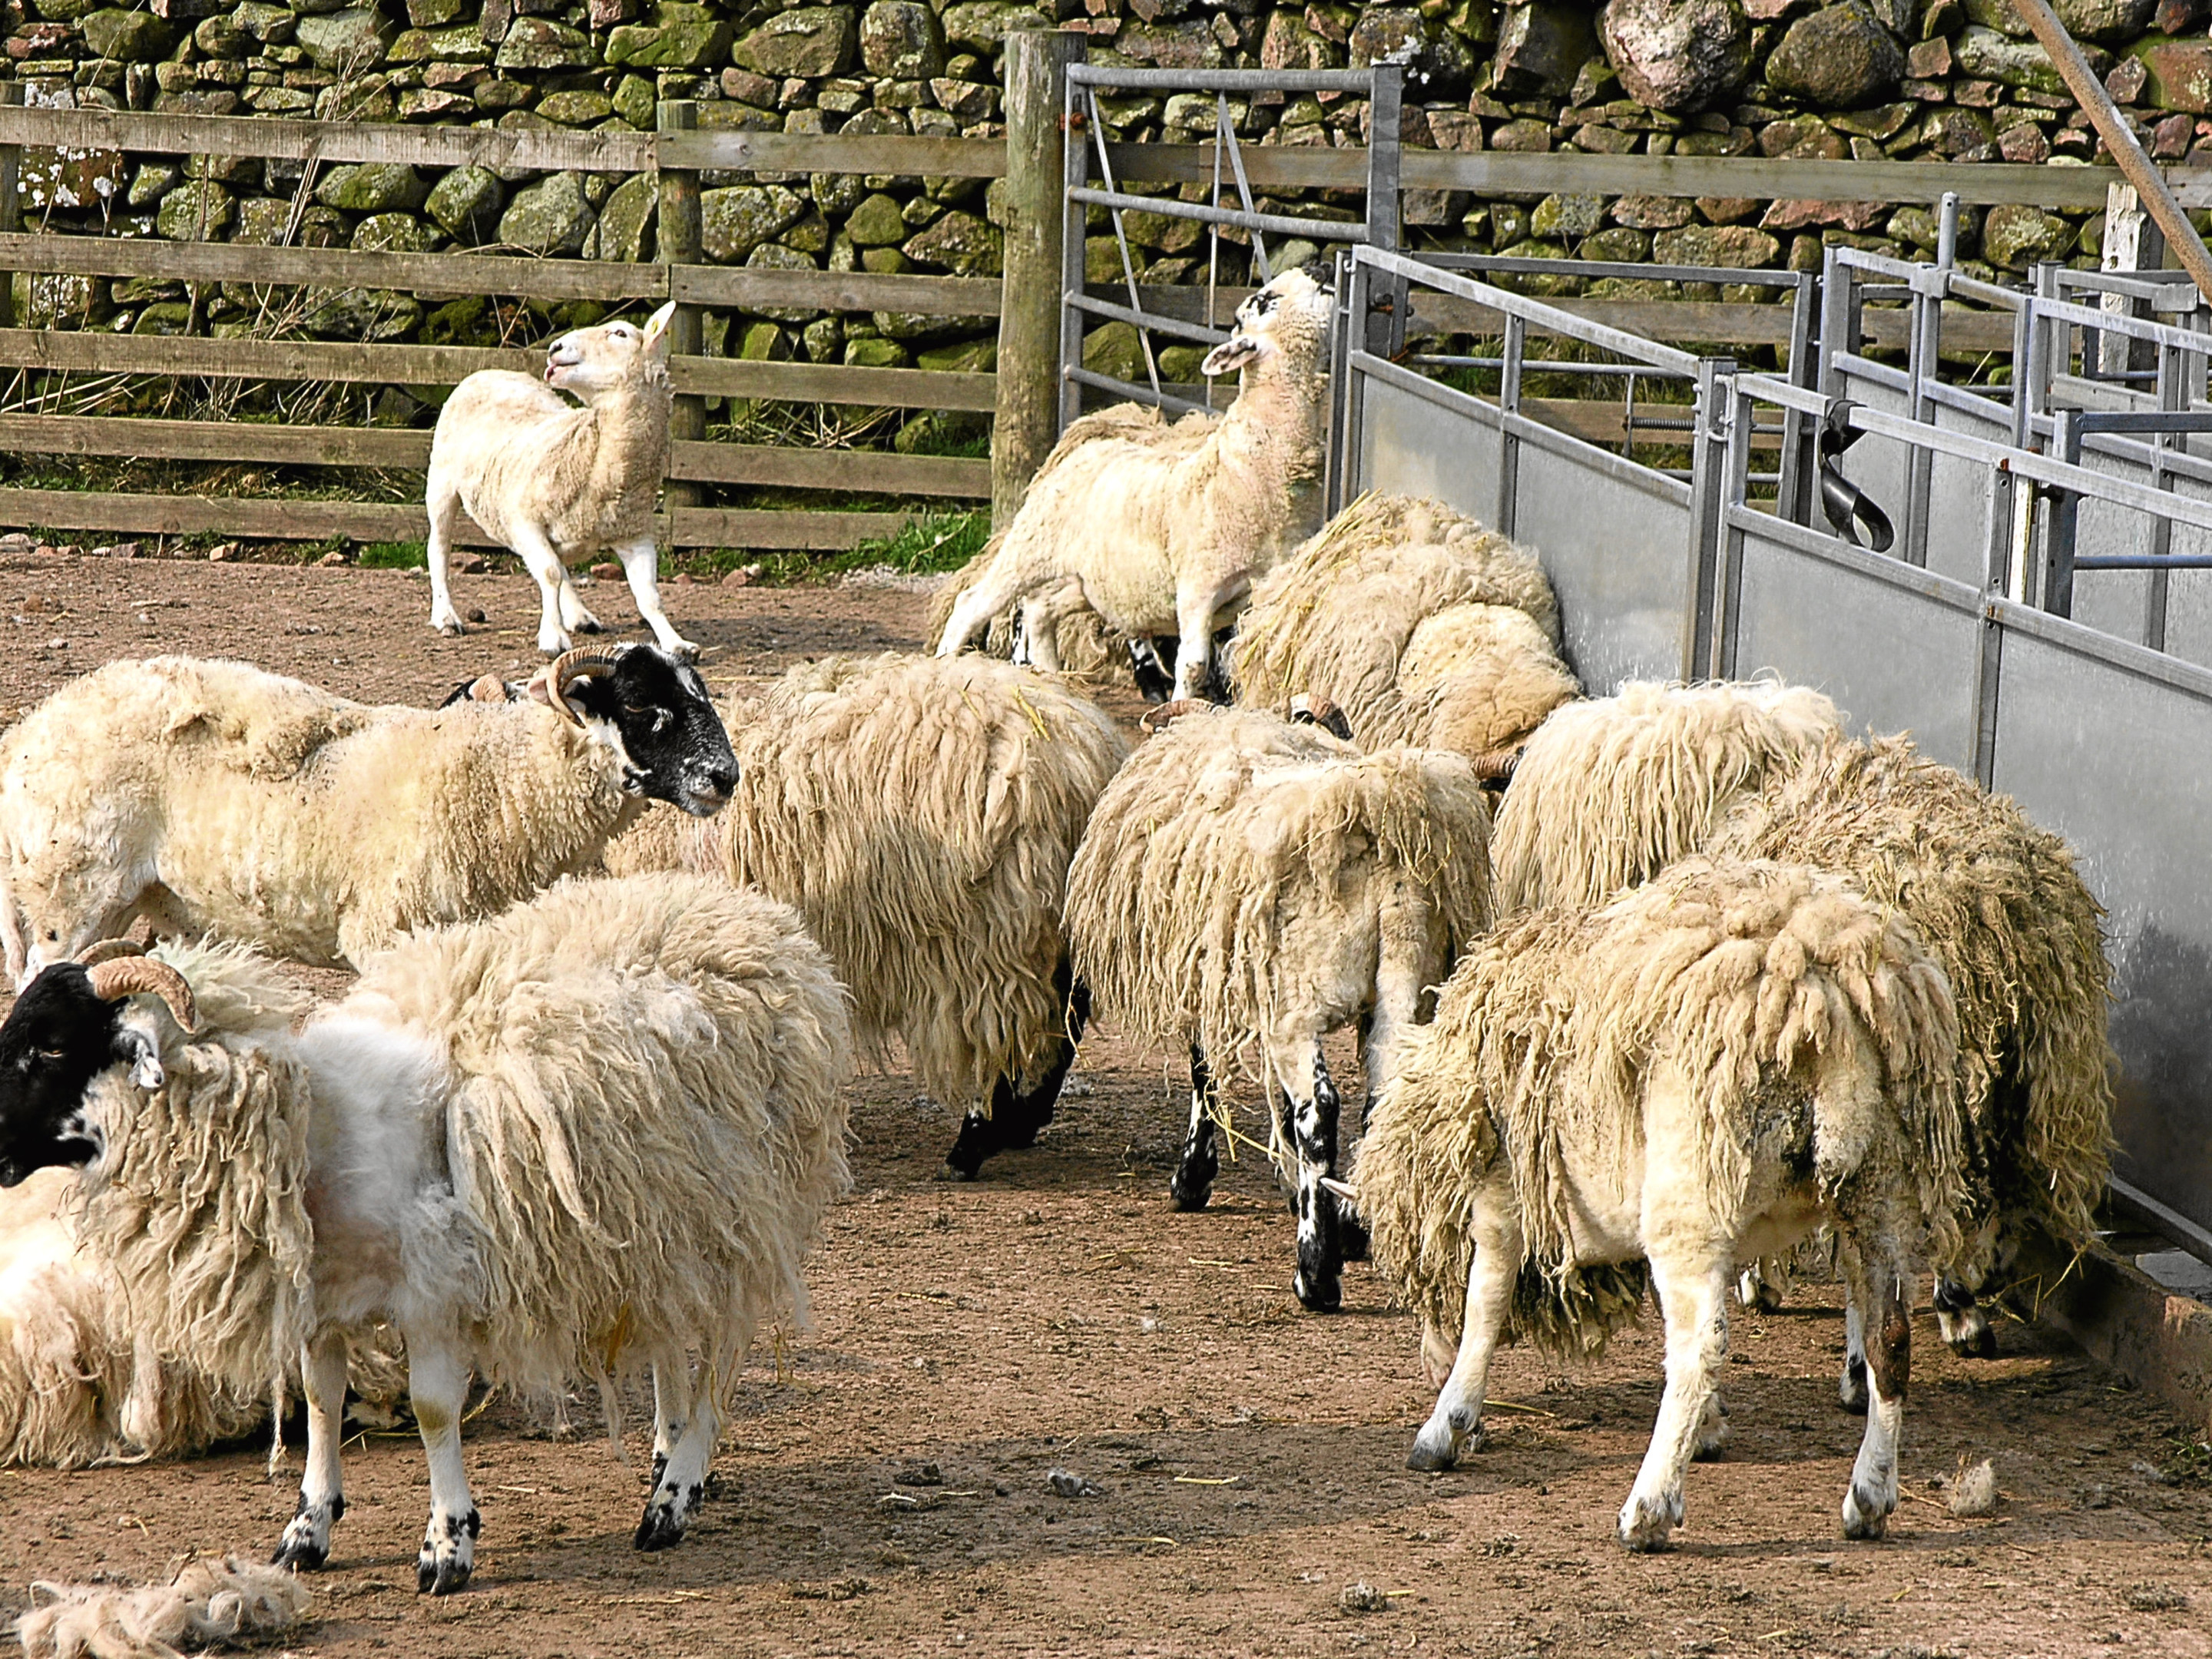 Sheep suffering from sheep scab.